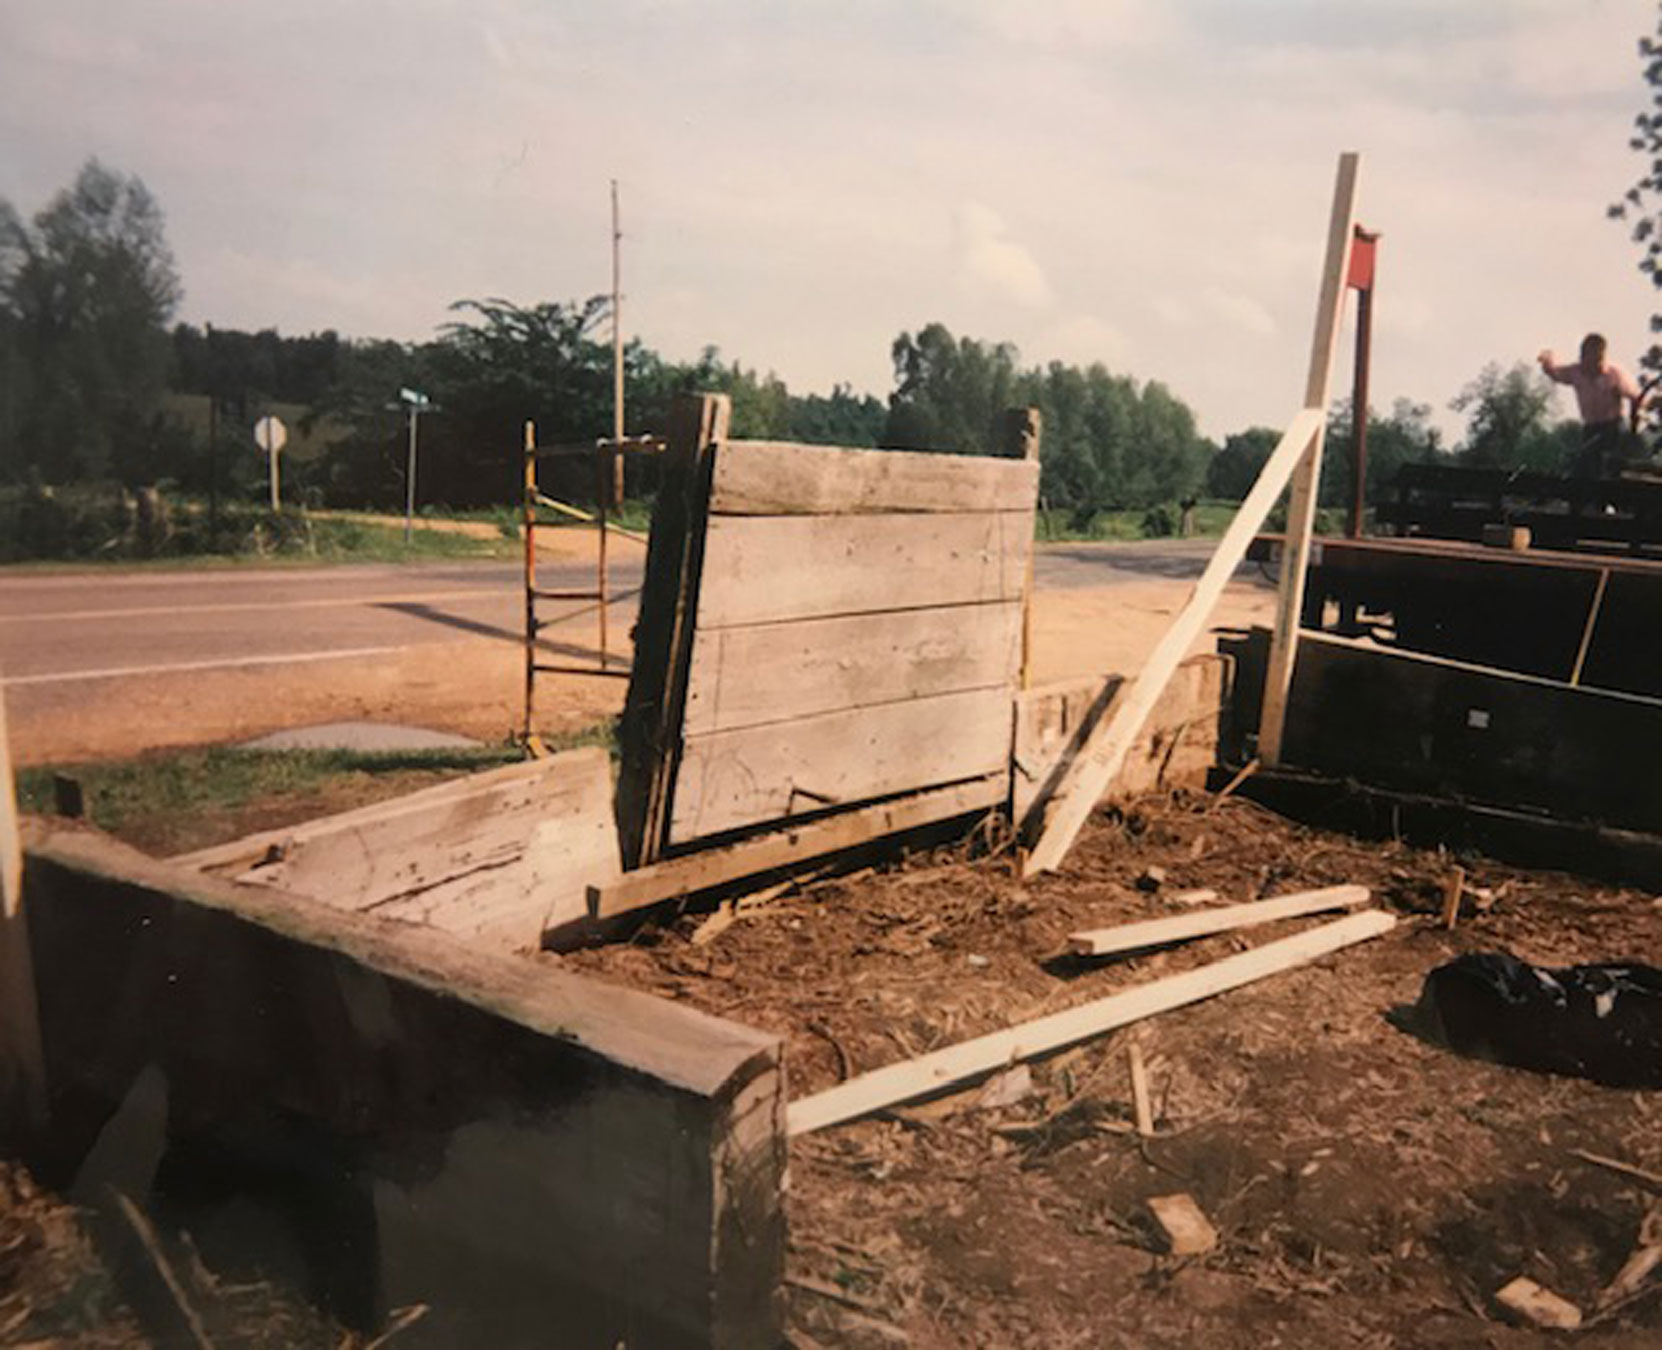 Muddy Waters cabin being disassembled at Stovall Farms for its move to the Blues Museum, , Clarksdale, Mississippi, circa 1990's (photo: Larry Amato)